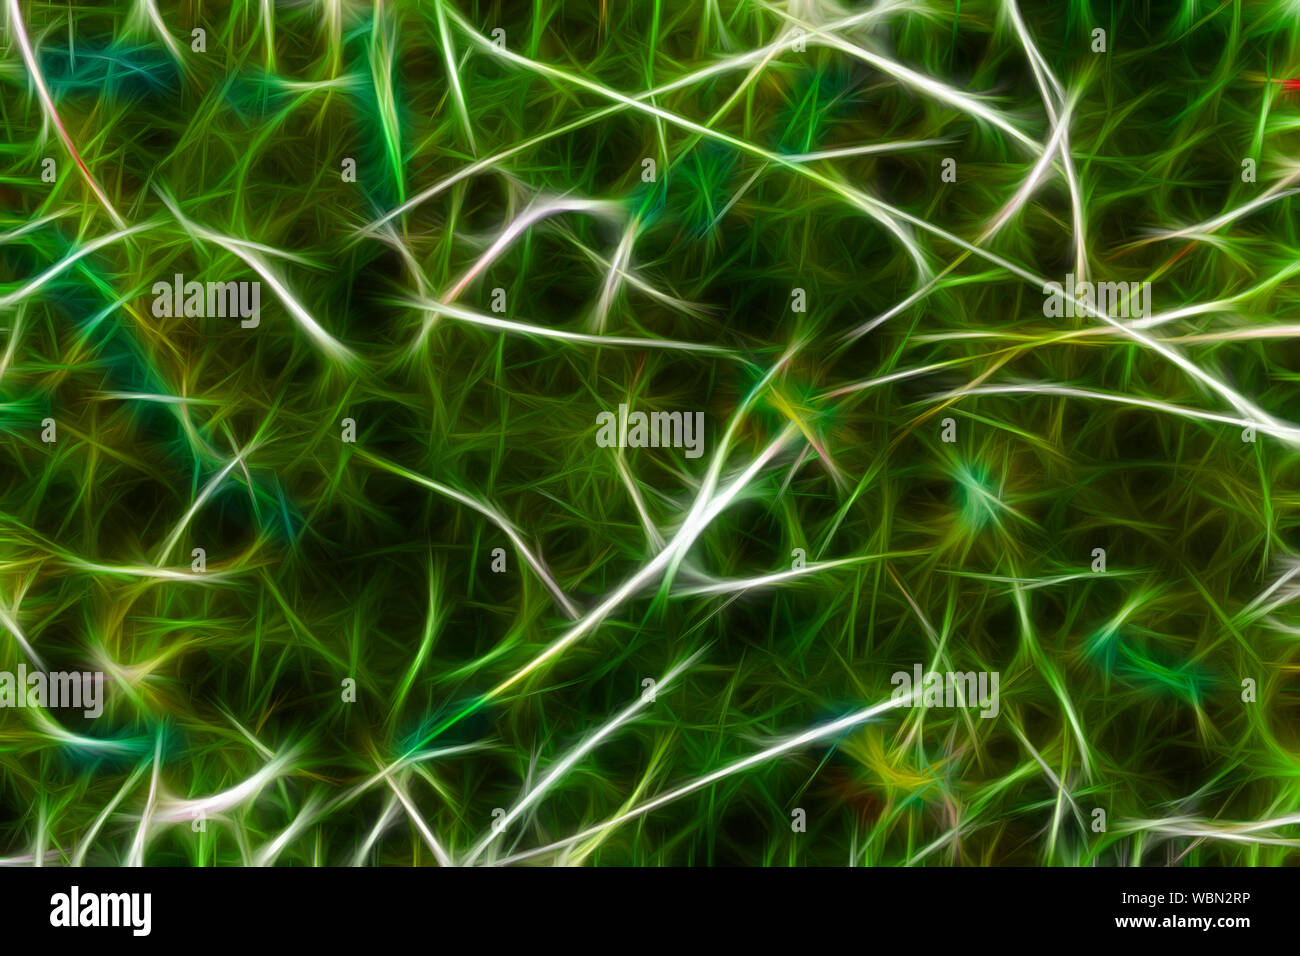 Neuron brain cells abstract background. Neurons connections backdrop painted in green color. Stock Photo